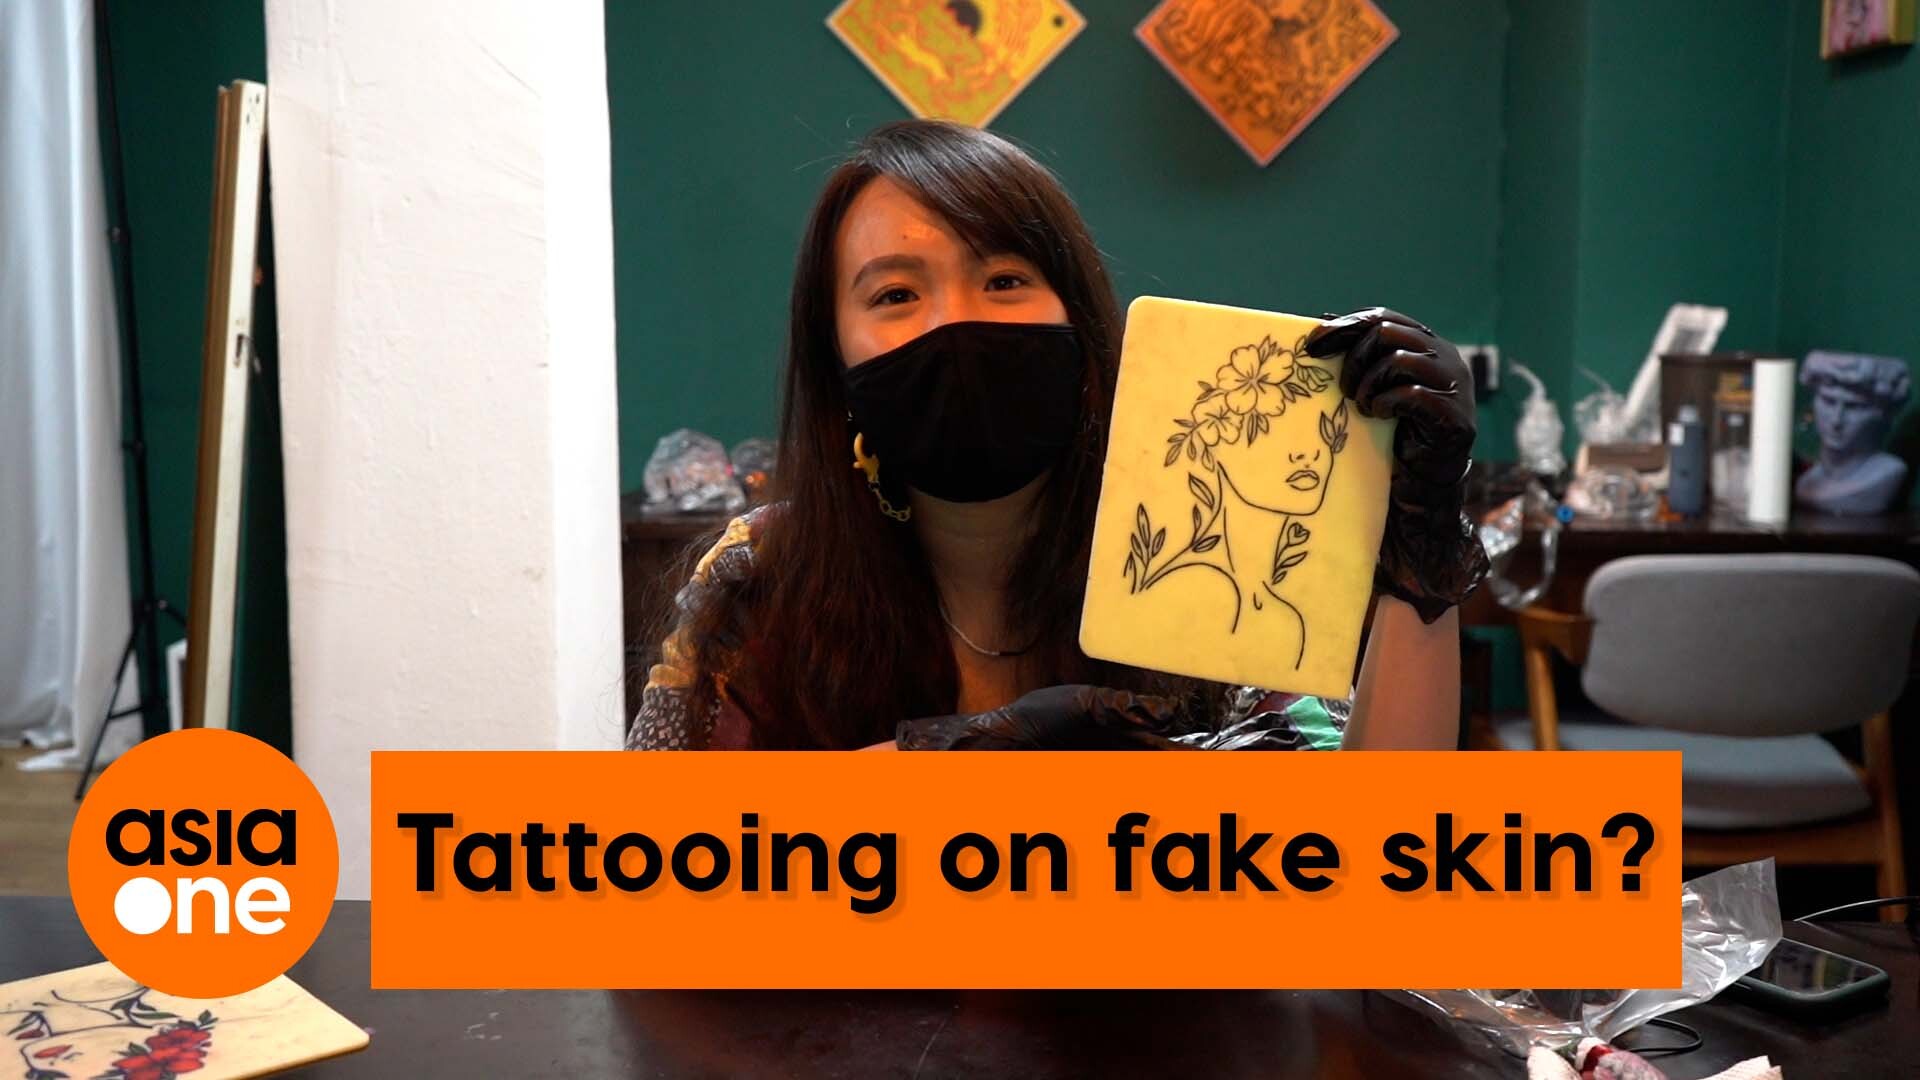 We tried becoming tattoo artists for a day